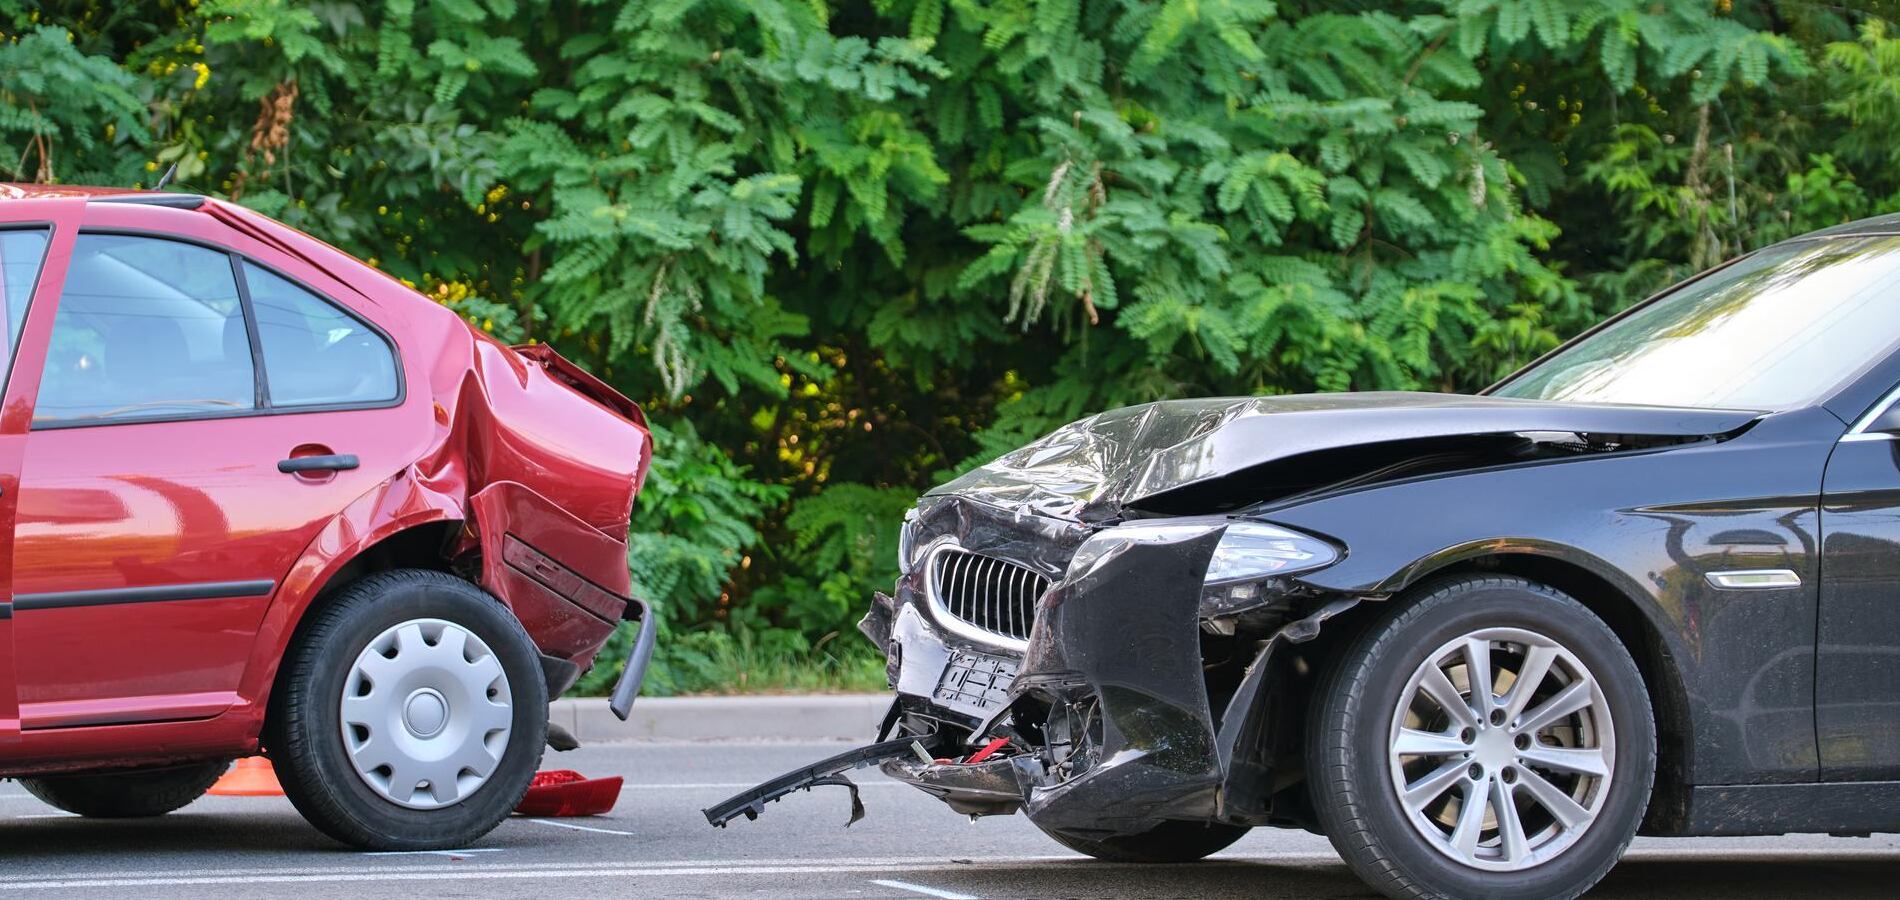 Car Accident Lawyer in Paramount, CA